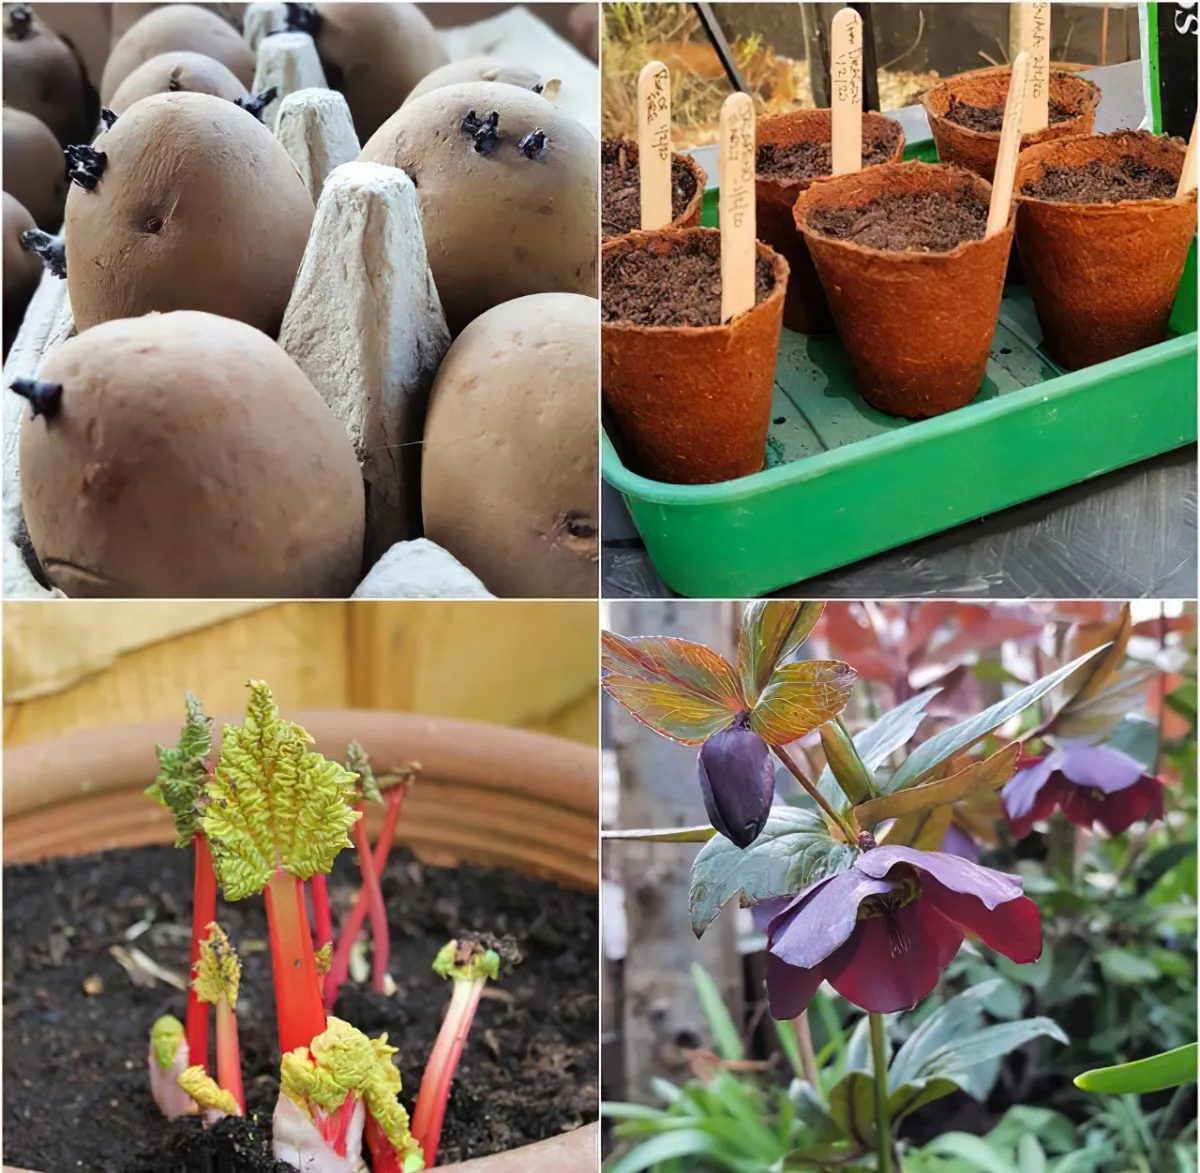 Caring for Container Crops in Winter January Gardening